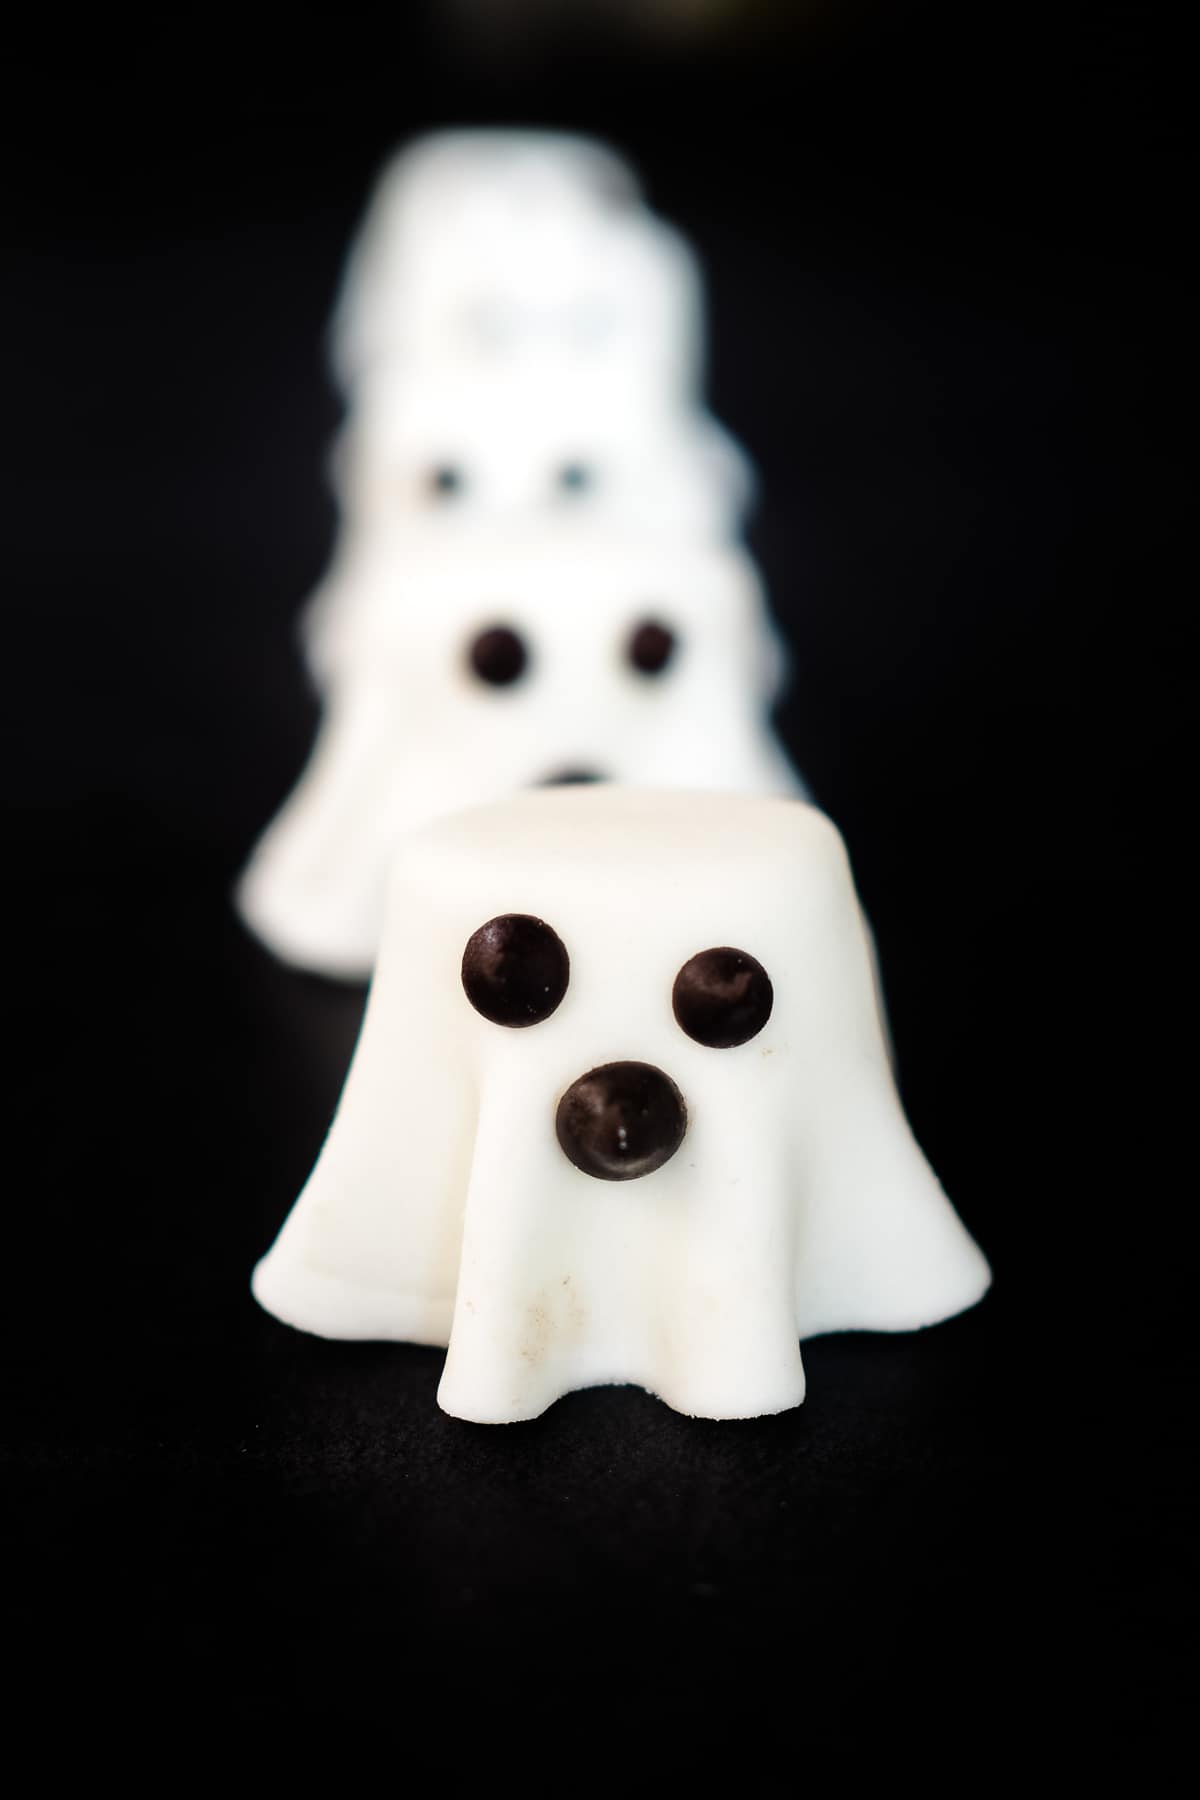 Marshmallow ghosts made of fondant and marshmallow and chocolate chips